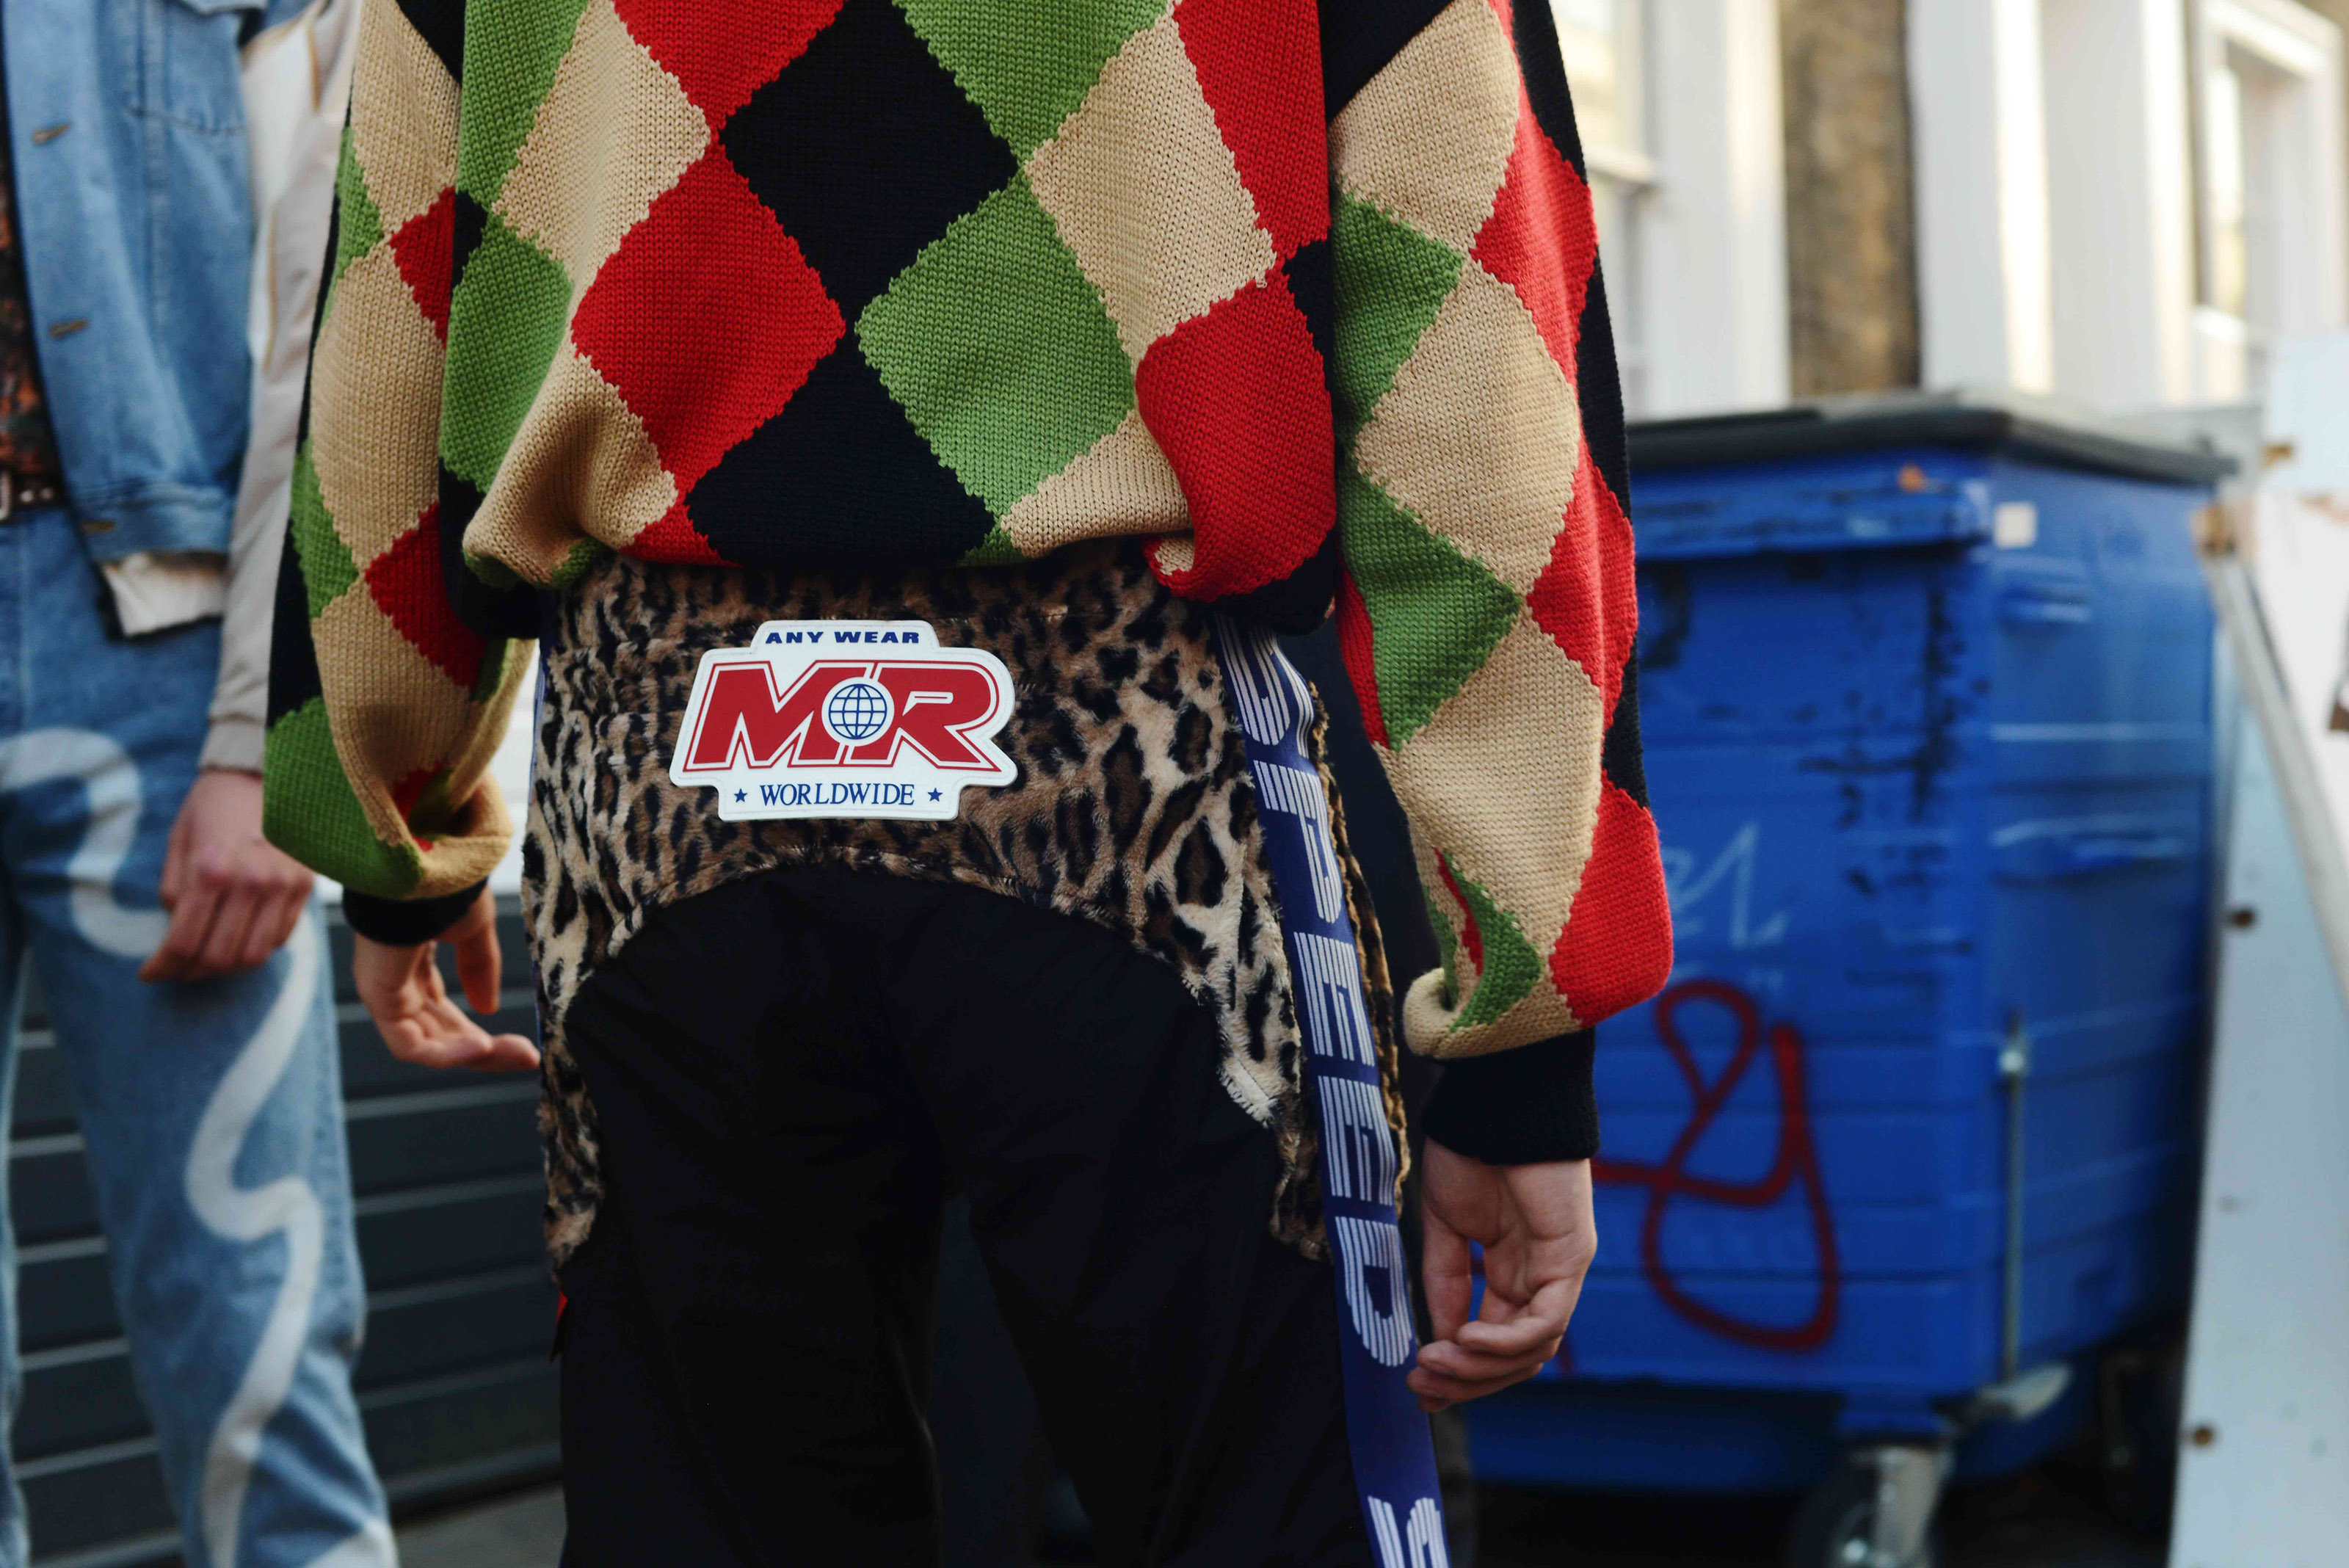 Gay Balenciaga and pub chic from Martine Rose: What's in fashion?